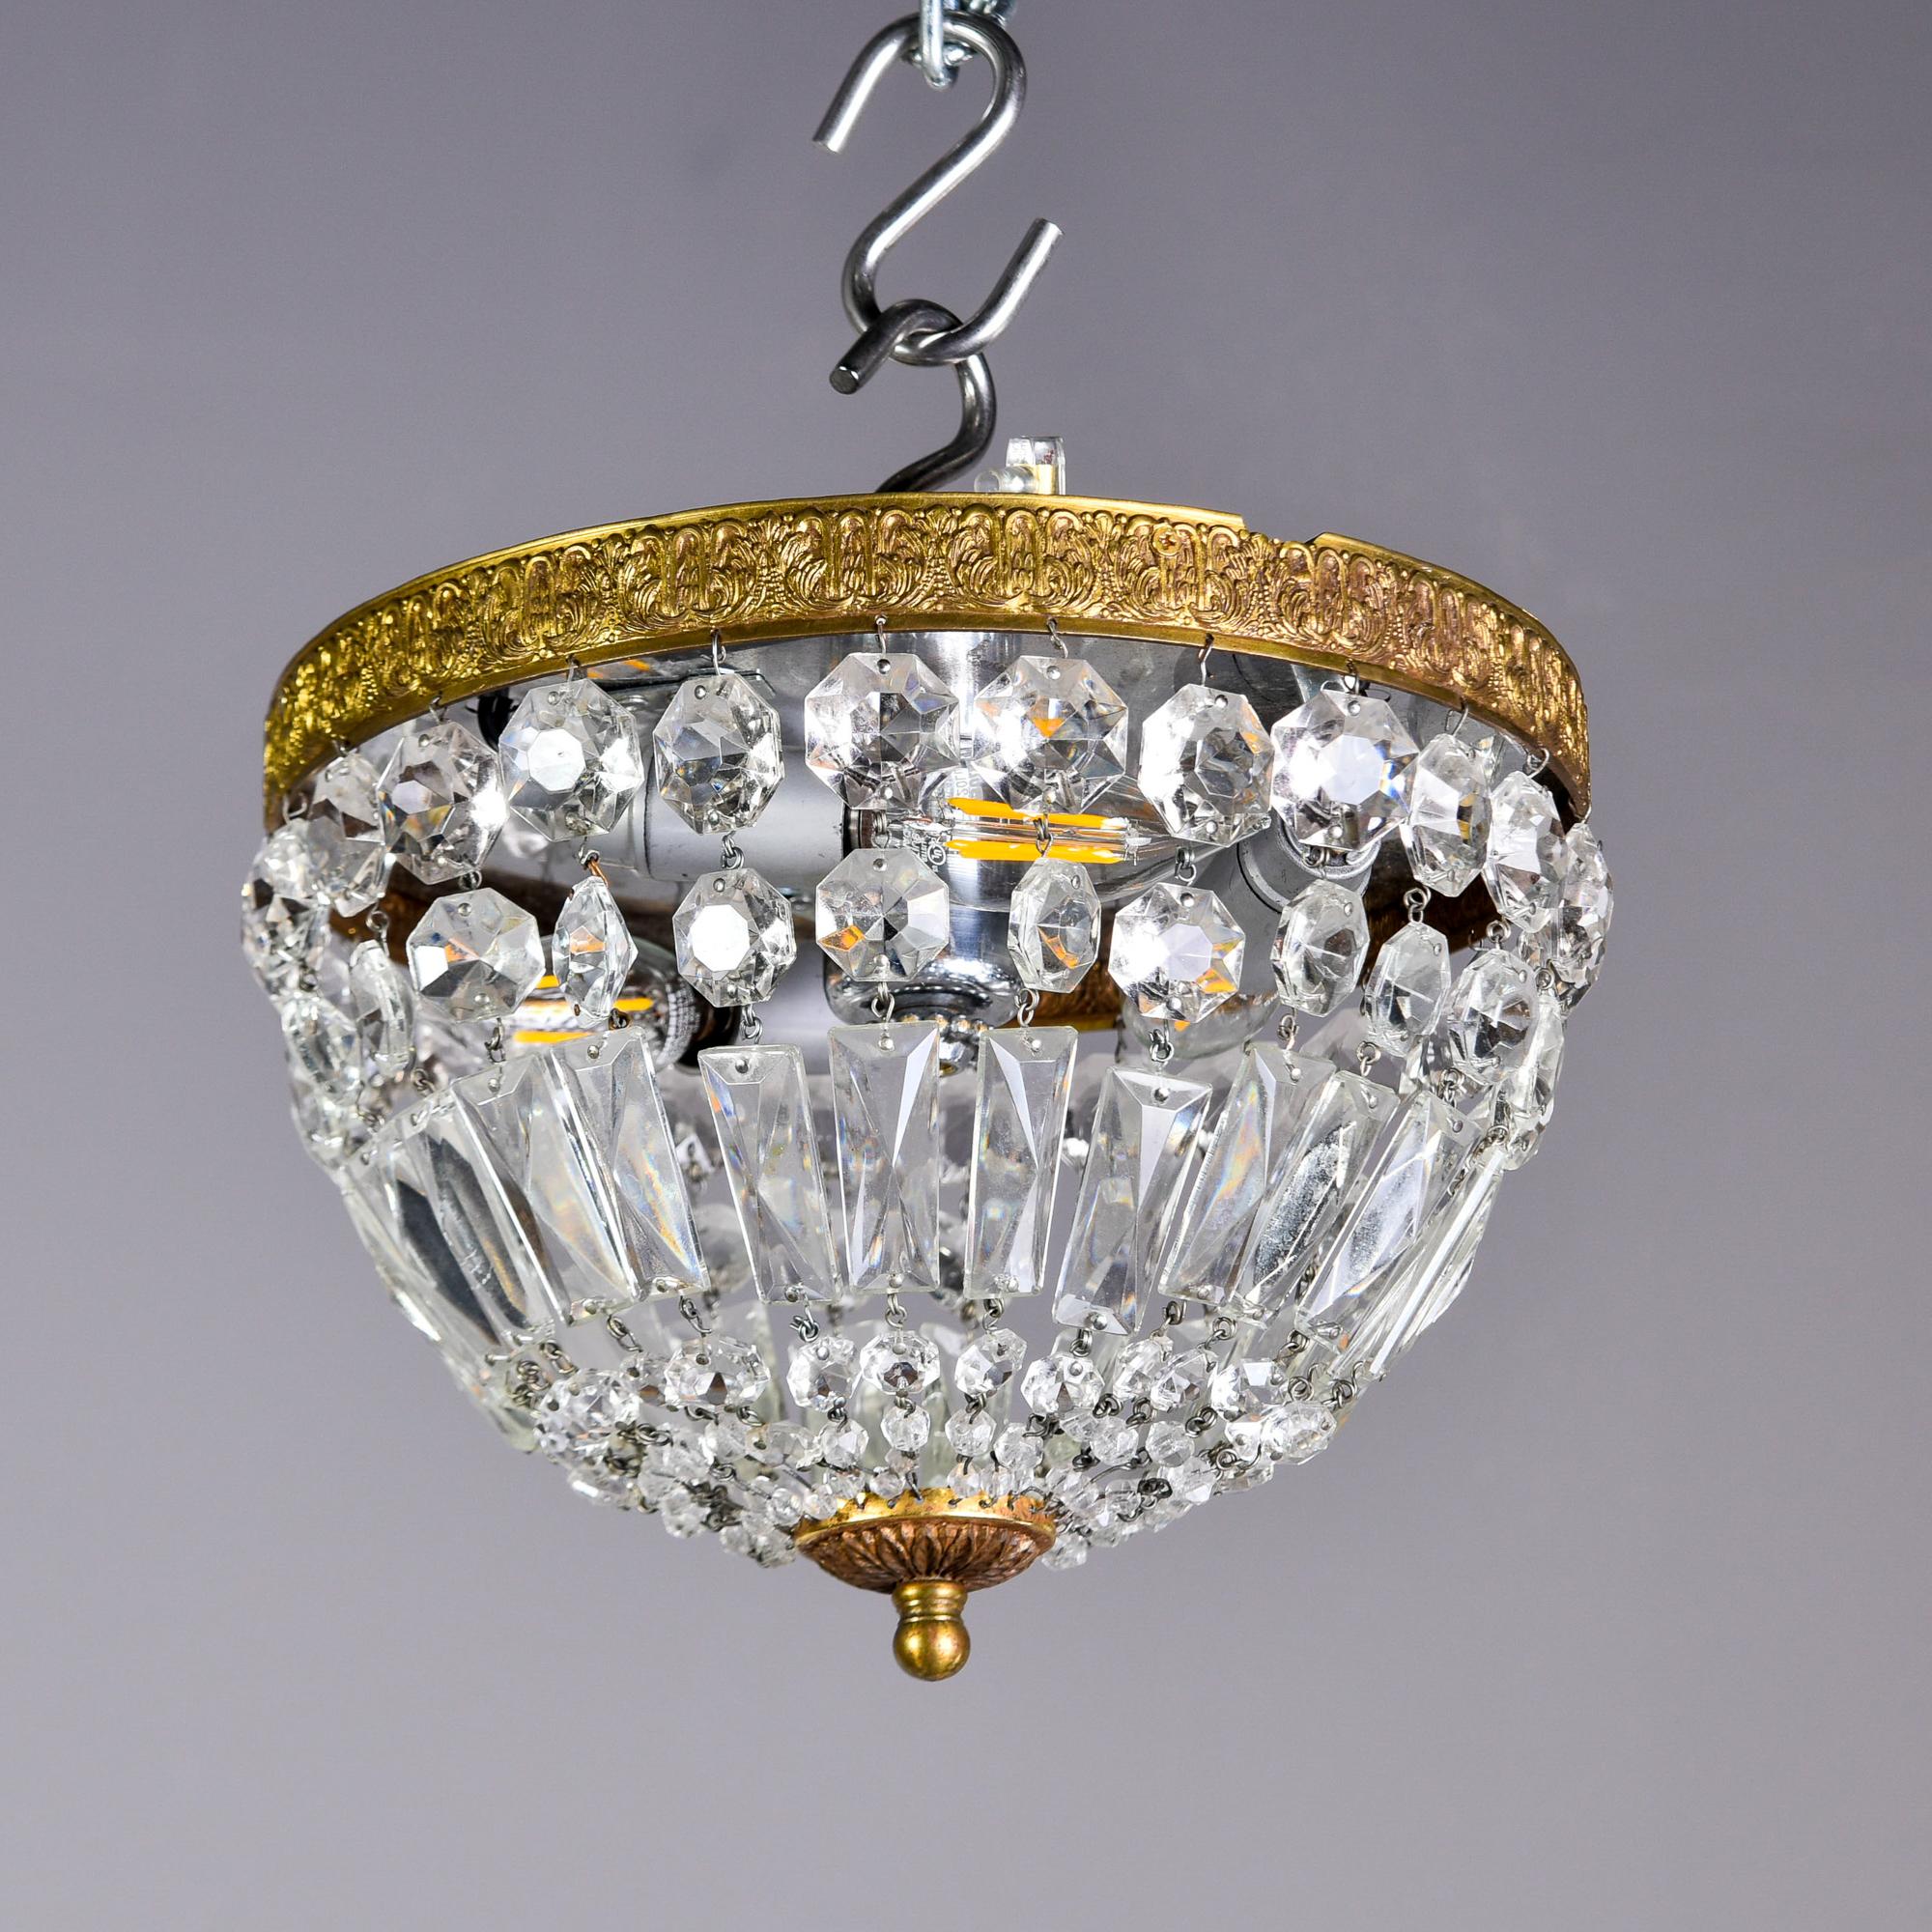 Found in Italy, this circa 1940s ceiling fixture has a pressed brass rim and crystals suspended in a basket form with a brass finial. Three internal candelabra sized sockets. New wiring for US electrical standards. Perfect petite fixture for a